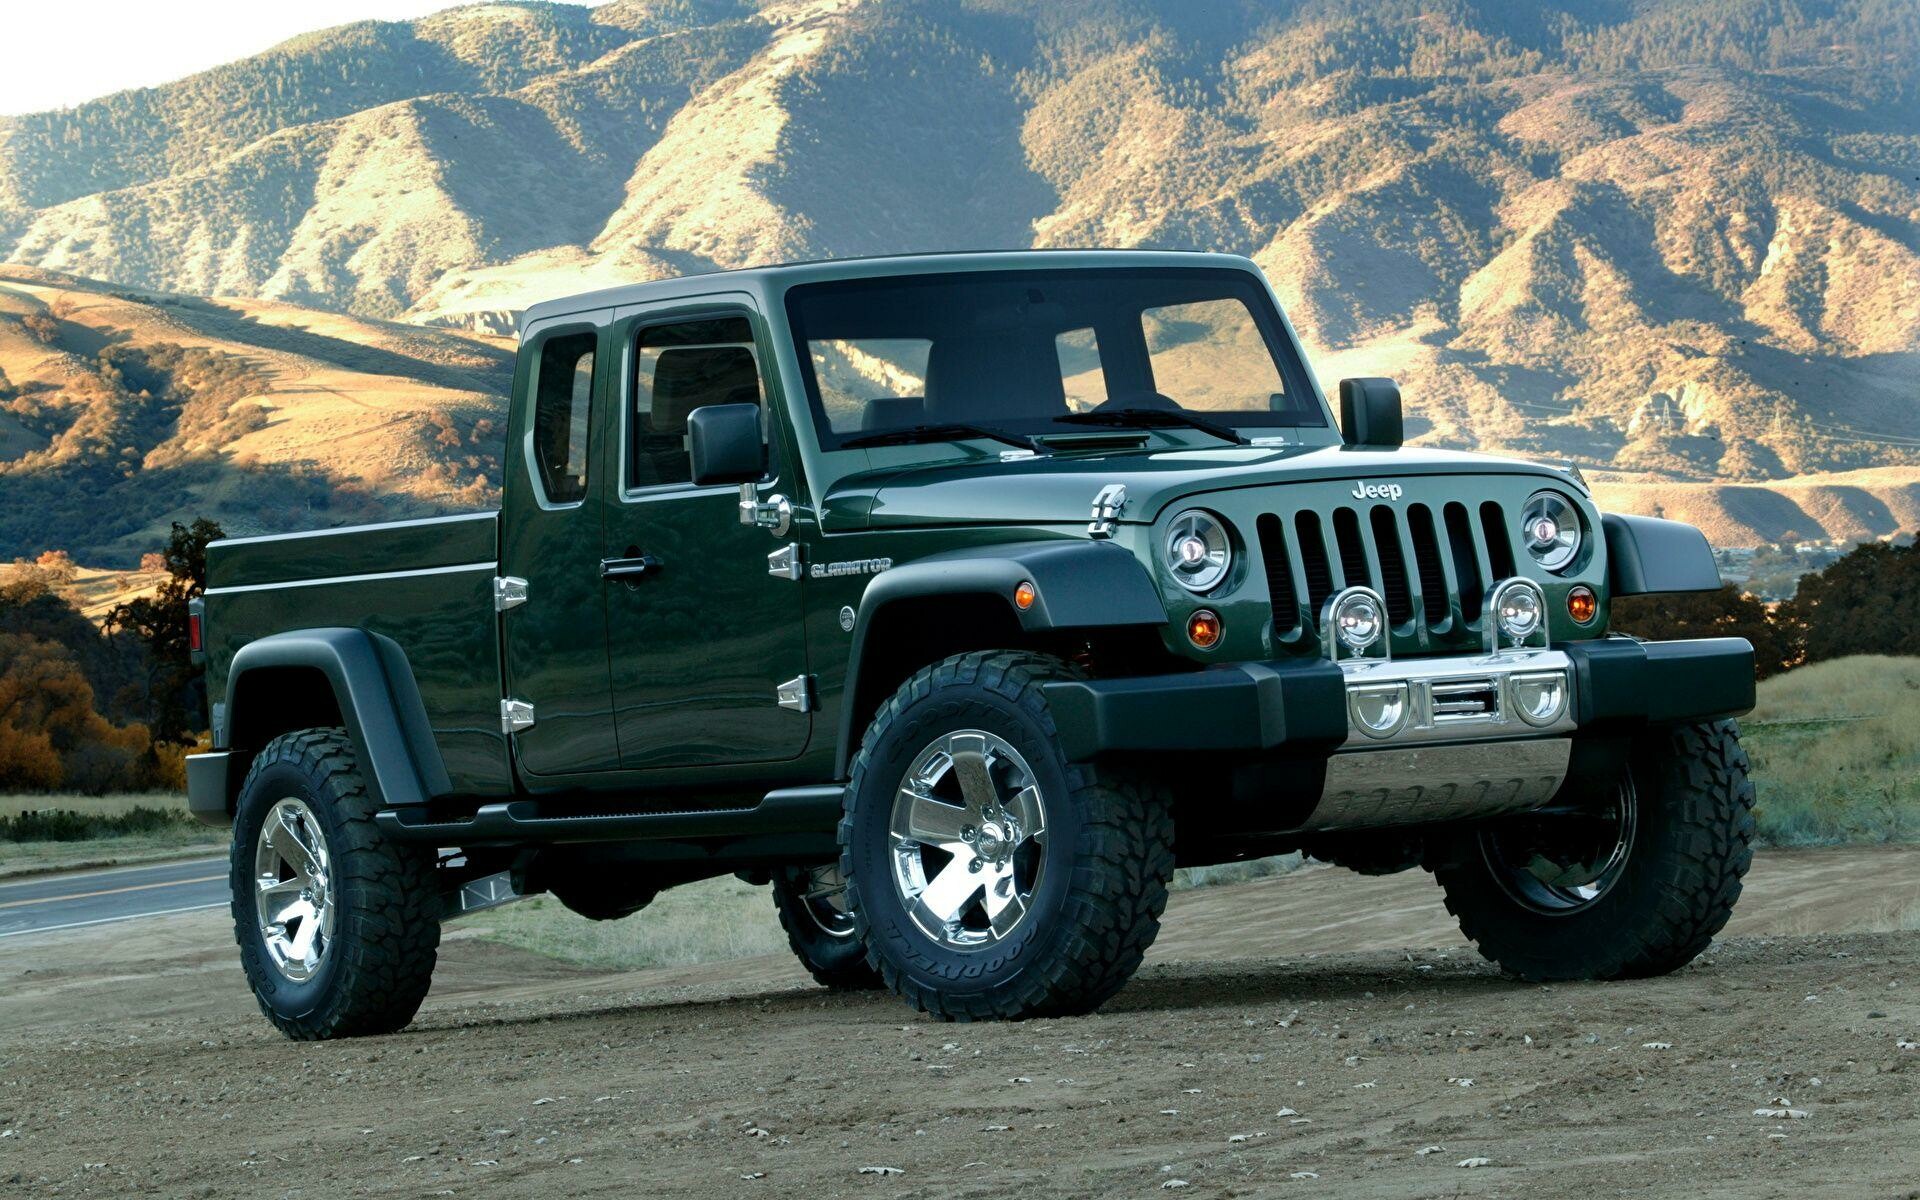 Jeep: The luxury trim on the Gladiator is known as the "Overland" model. 1920x1200 HD Wallpaper.